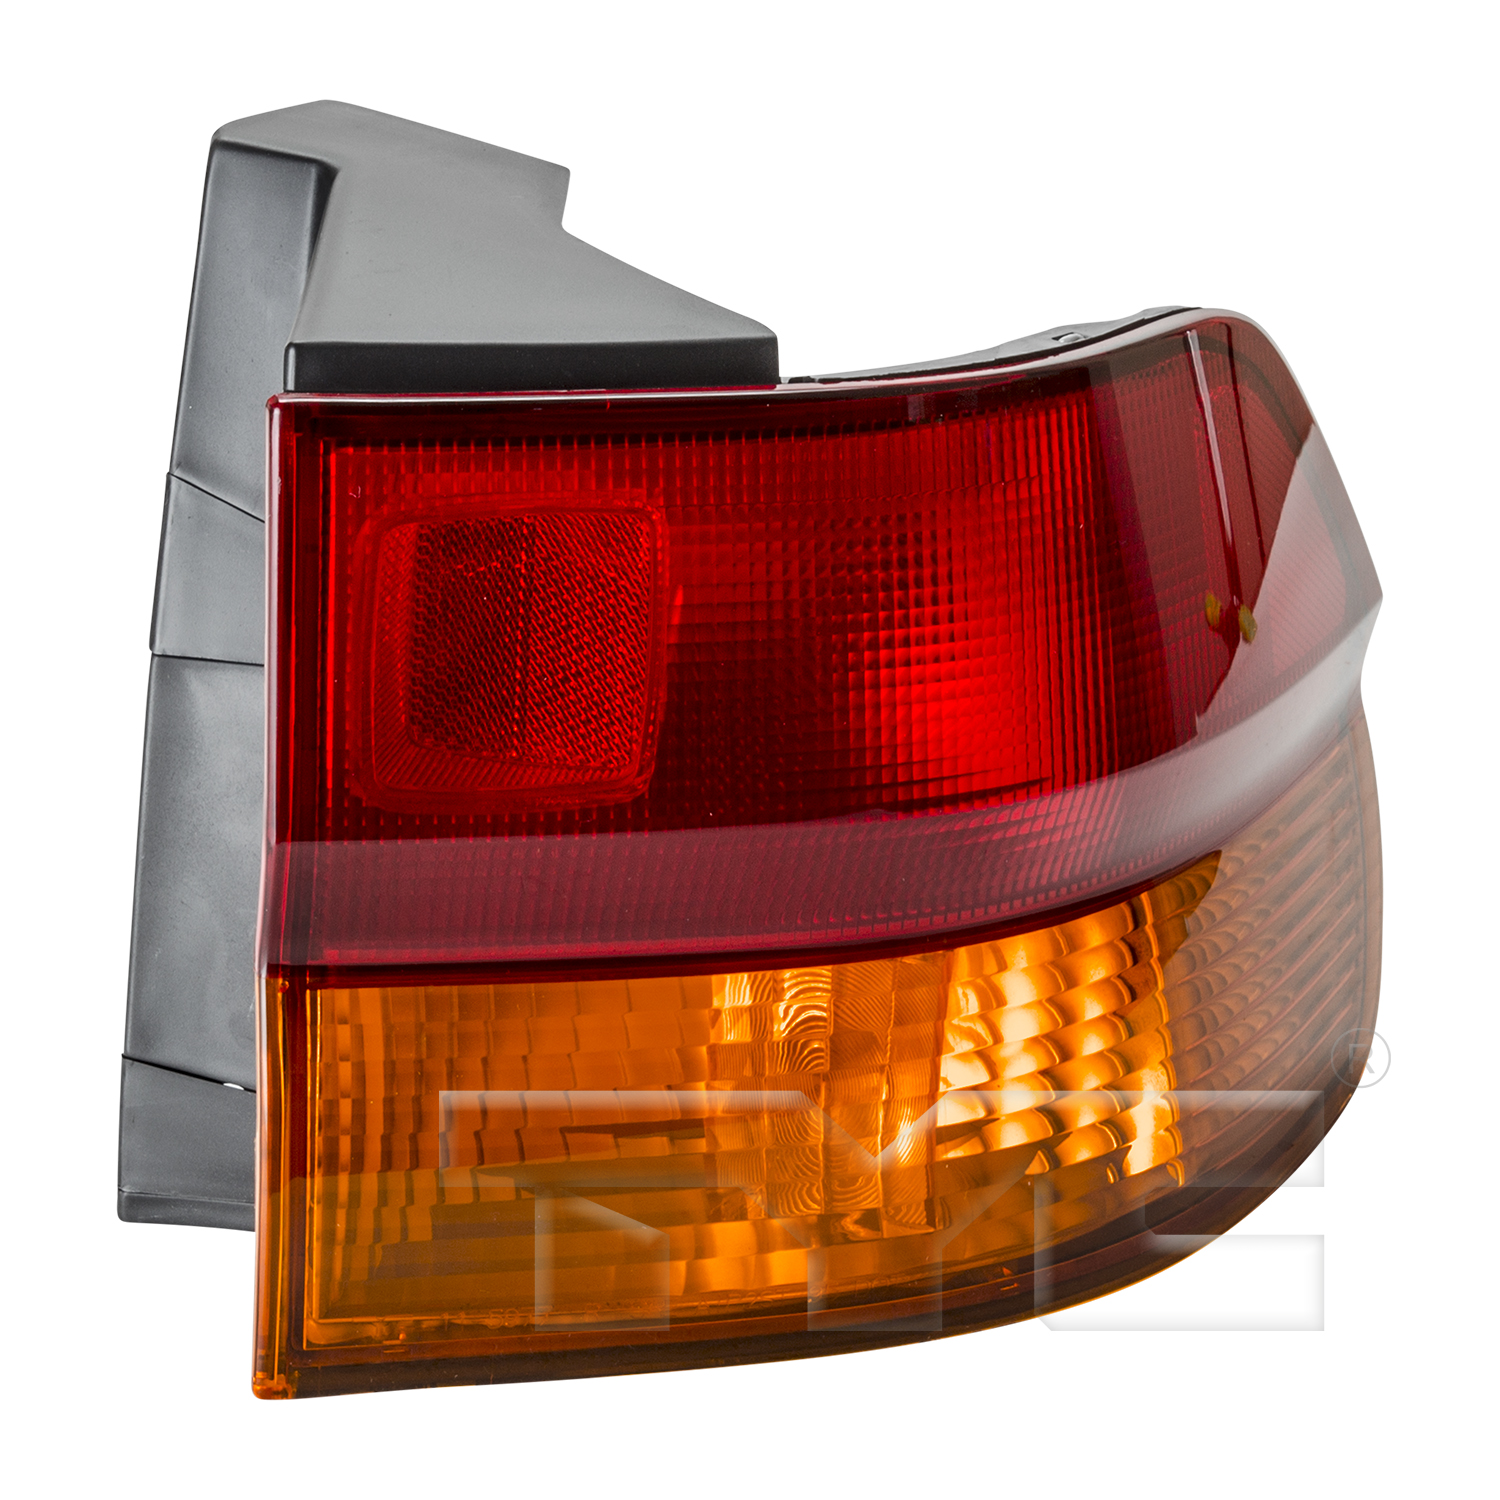 Aftermarket TAILLIGHTS for HONDA - ODYSSEY, ODYSSEY,02-04,RT Taillamp lens/housing